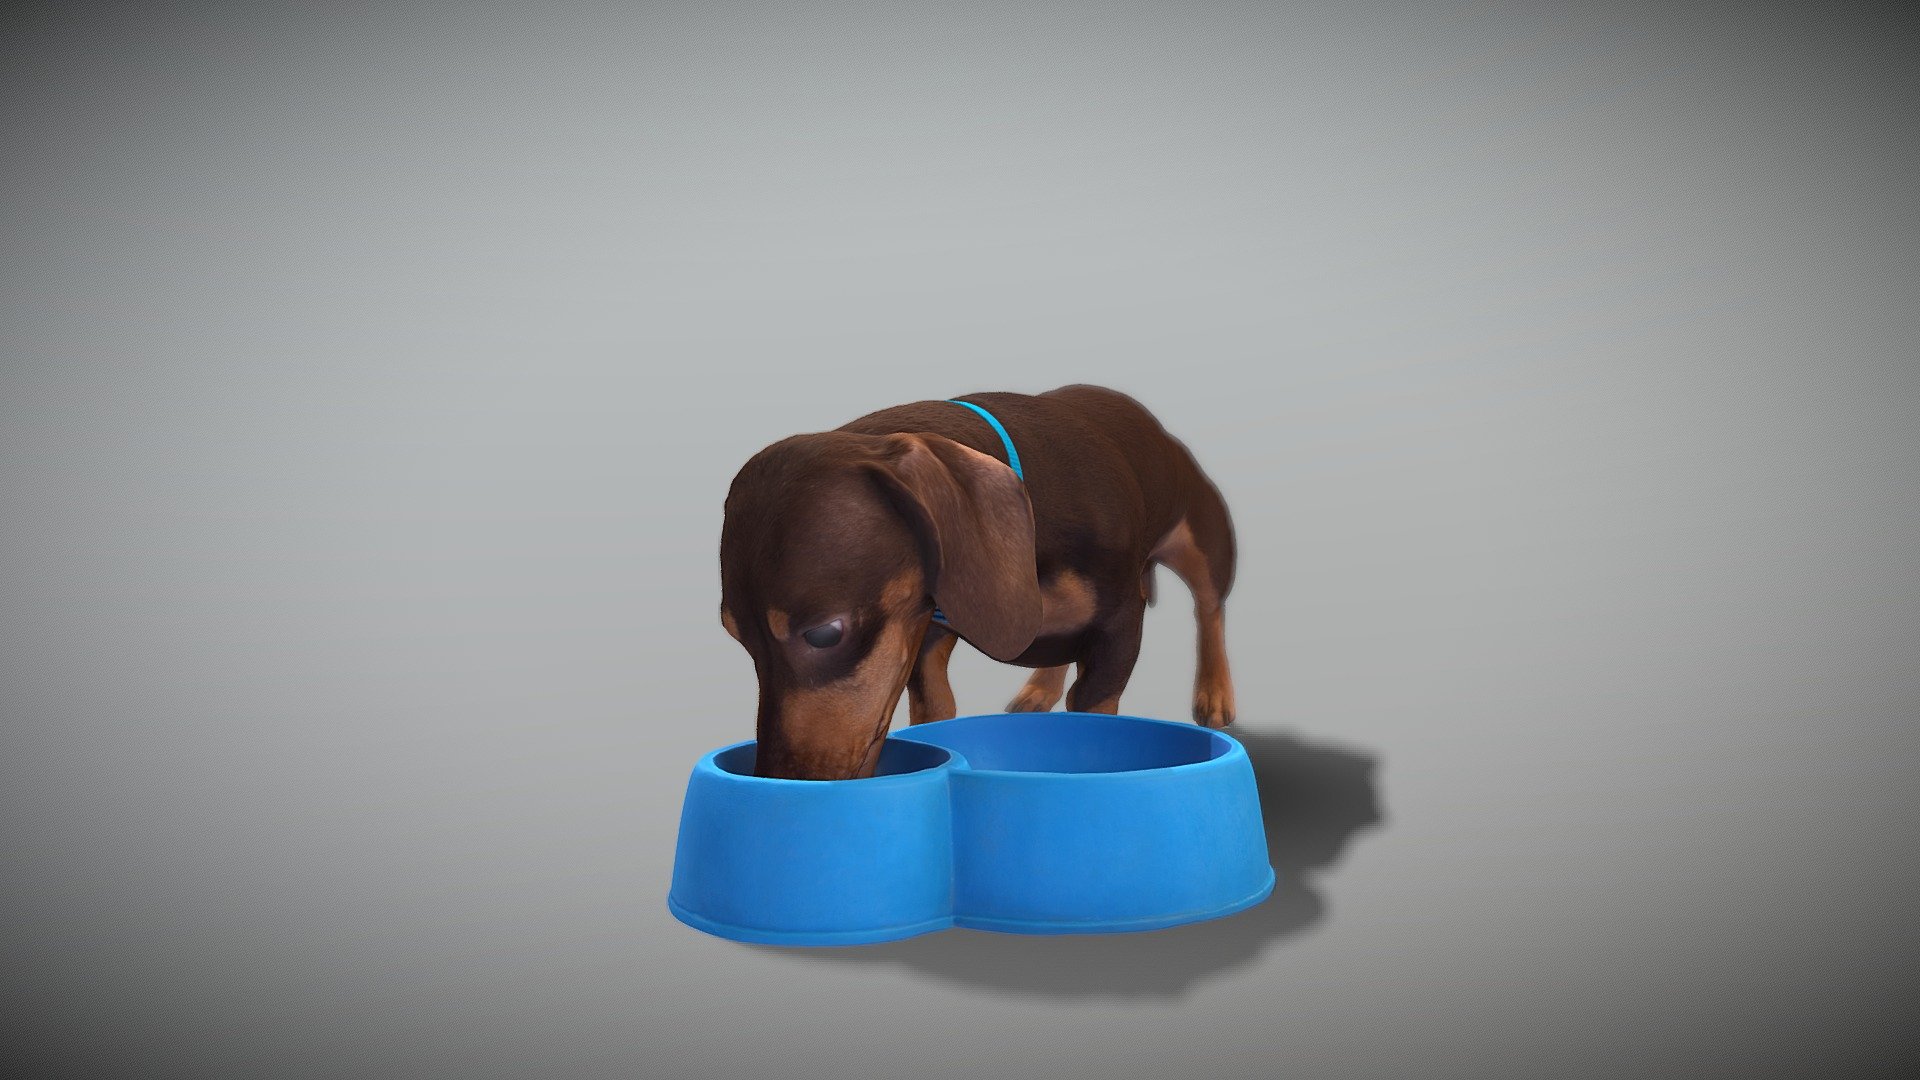 This is a true sized and highly detailed model of a young charming Dachshund dog. It will add life and coziness to any architectural visualisation of houses, playgrounds, parques, urban landscapes, etc. This model is suitable for game engine integration, VR/AR content, etc.

Technical specifications:




digital double 3d scan model

150k &amp; 30k triangles | double triangulated

high-poly model (.ztl tool with 5 subdivisions) clean and retopologized automatically via ZRemesher

sufficiently clean

PBR textures 8K resolution: Diffuse, Normal, Specular maps

non-overlapping UV map

no extra plugins are required for this model

Download package includes a Cinema 4D project file with Redshift shader, OBJ, FBX, STL files, which are applicable for 3ds Max, Maya, Unreal Engine, Unity, Blender, etc. All the textures you will find in the “Tex” folder, included into the main archive.

3D EVERYTHING

Stand with Ukraine! - Dog with bowl 32 - Buy Royalty Free 3D model by deep3dstudio 3d model